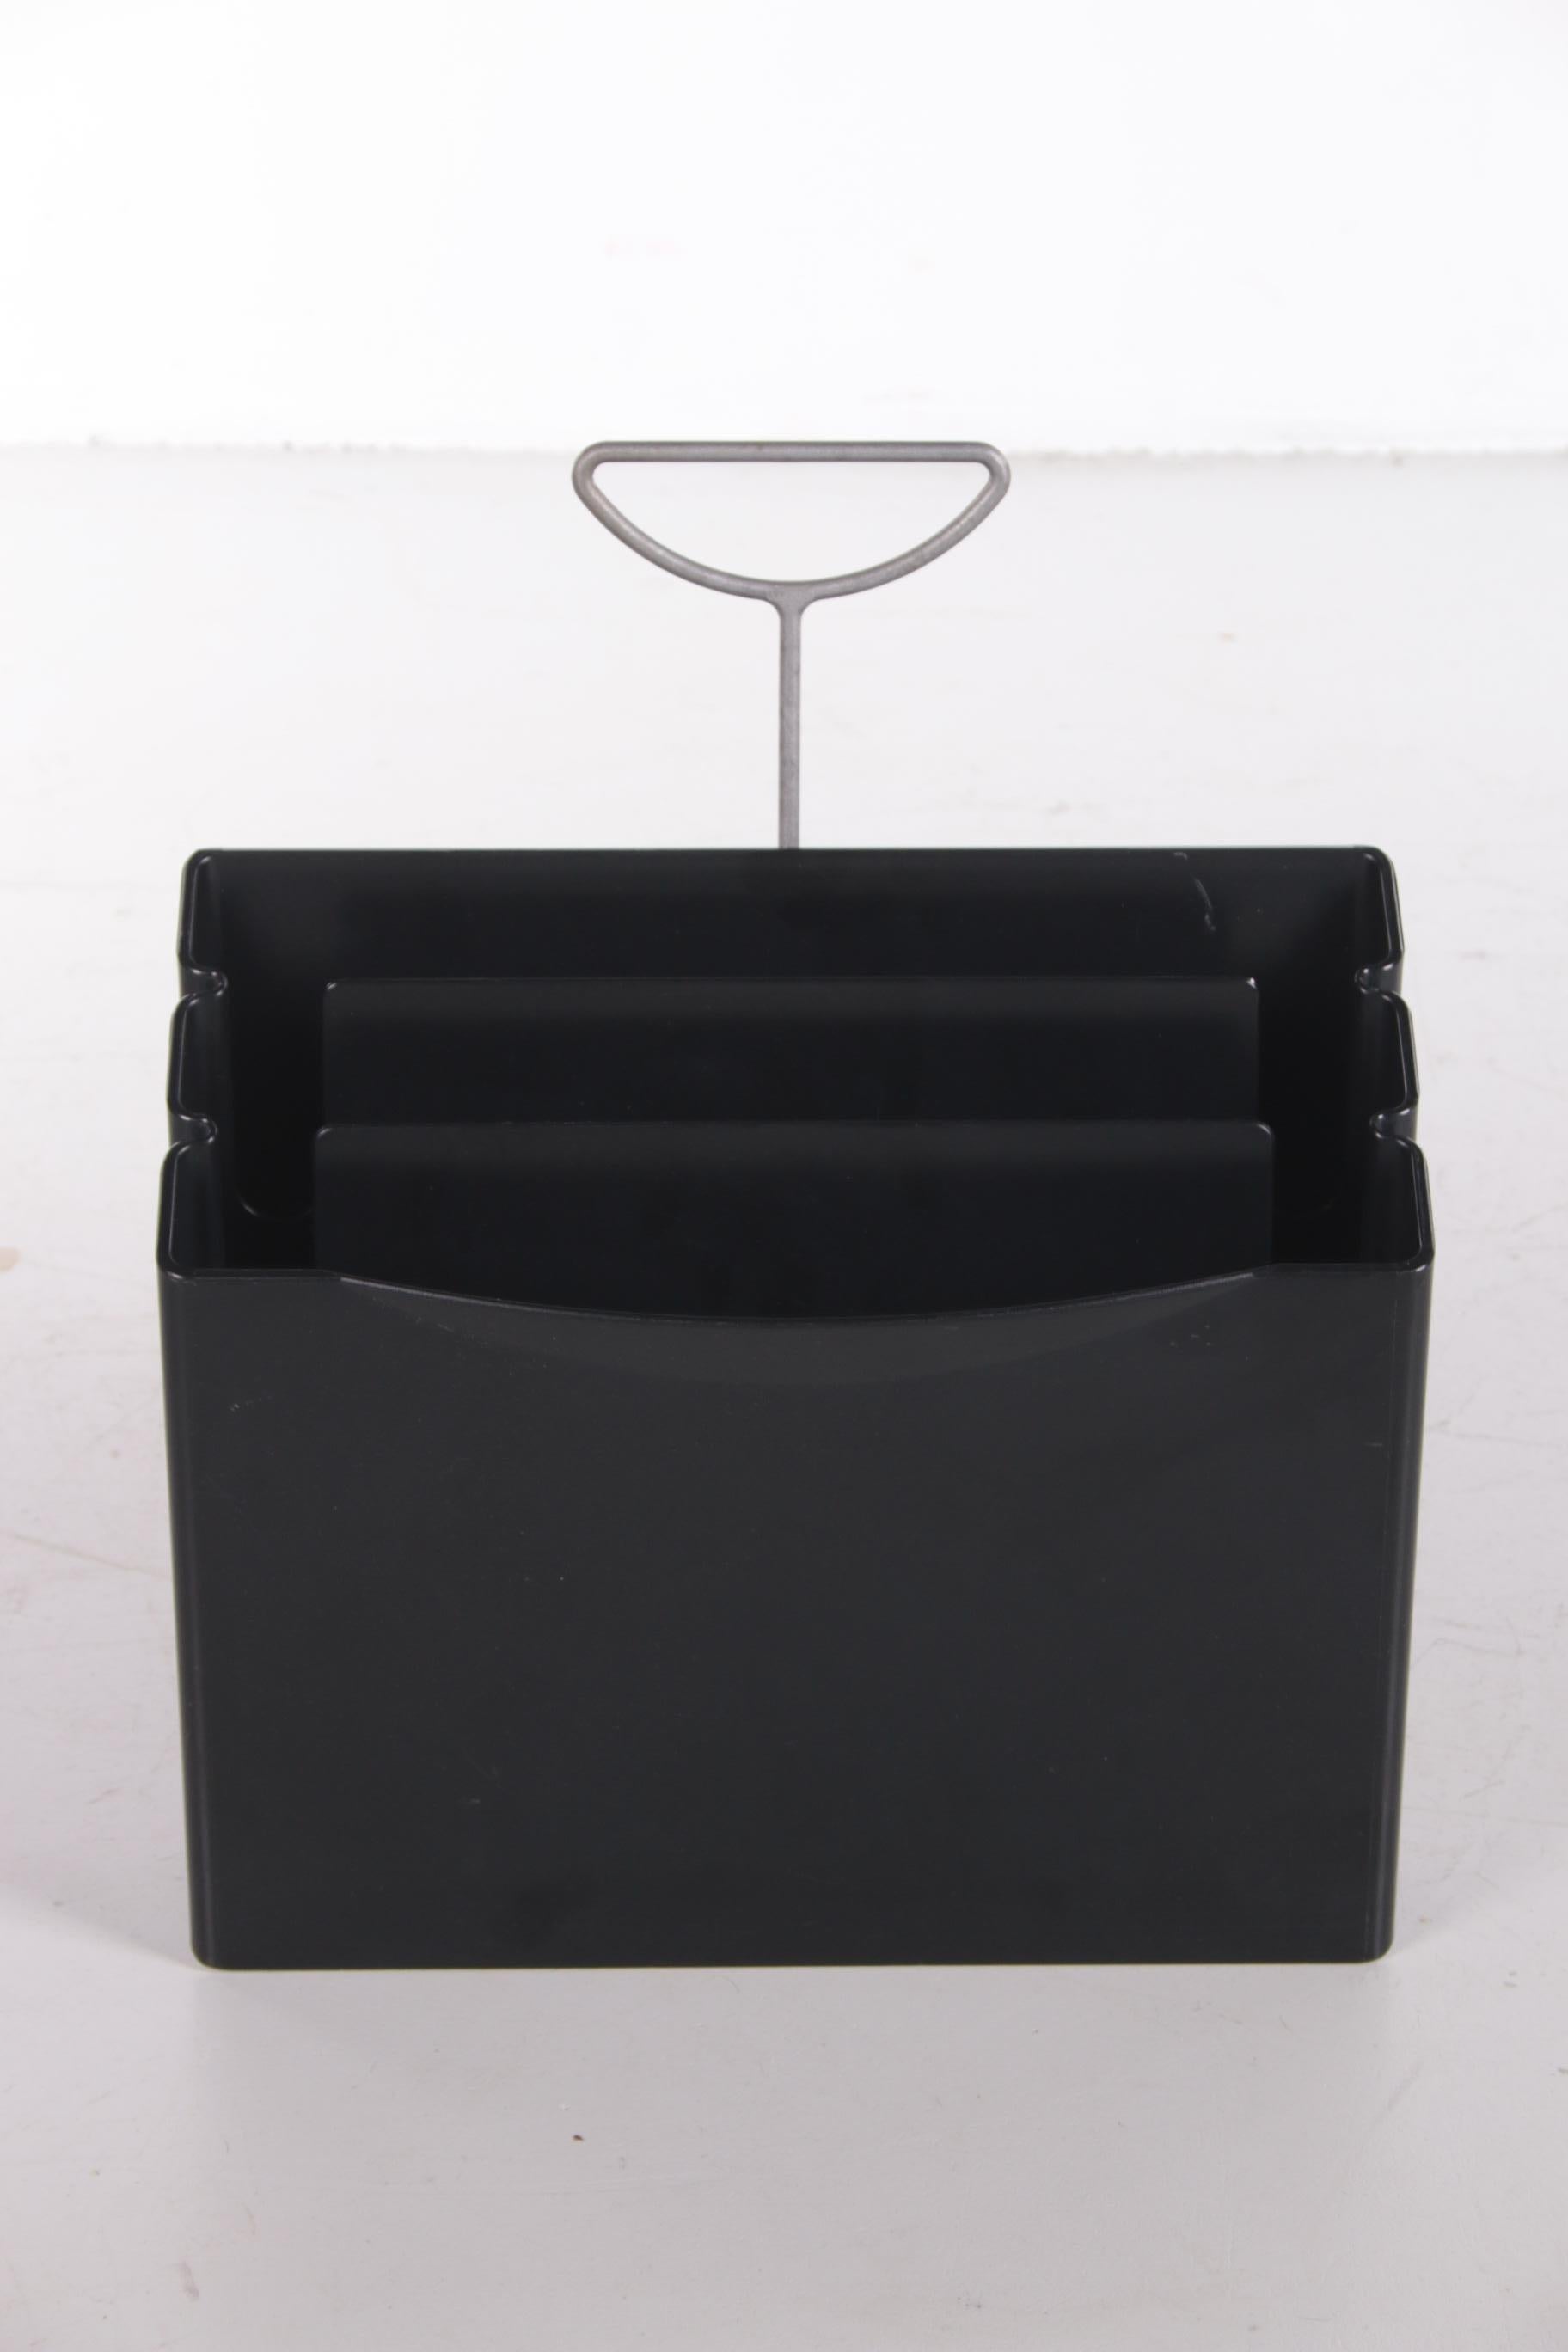 Magazine Rack by Andries & Hiroko Van Onck for Magis, 1991 For Sale 5